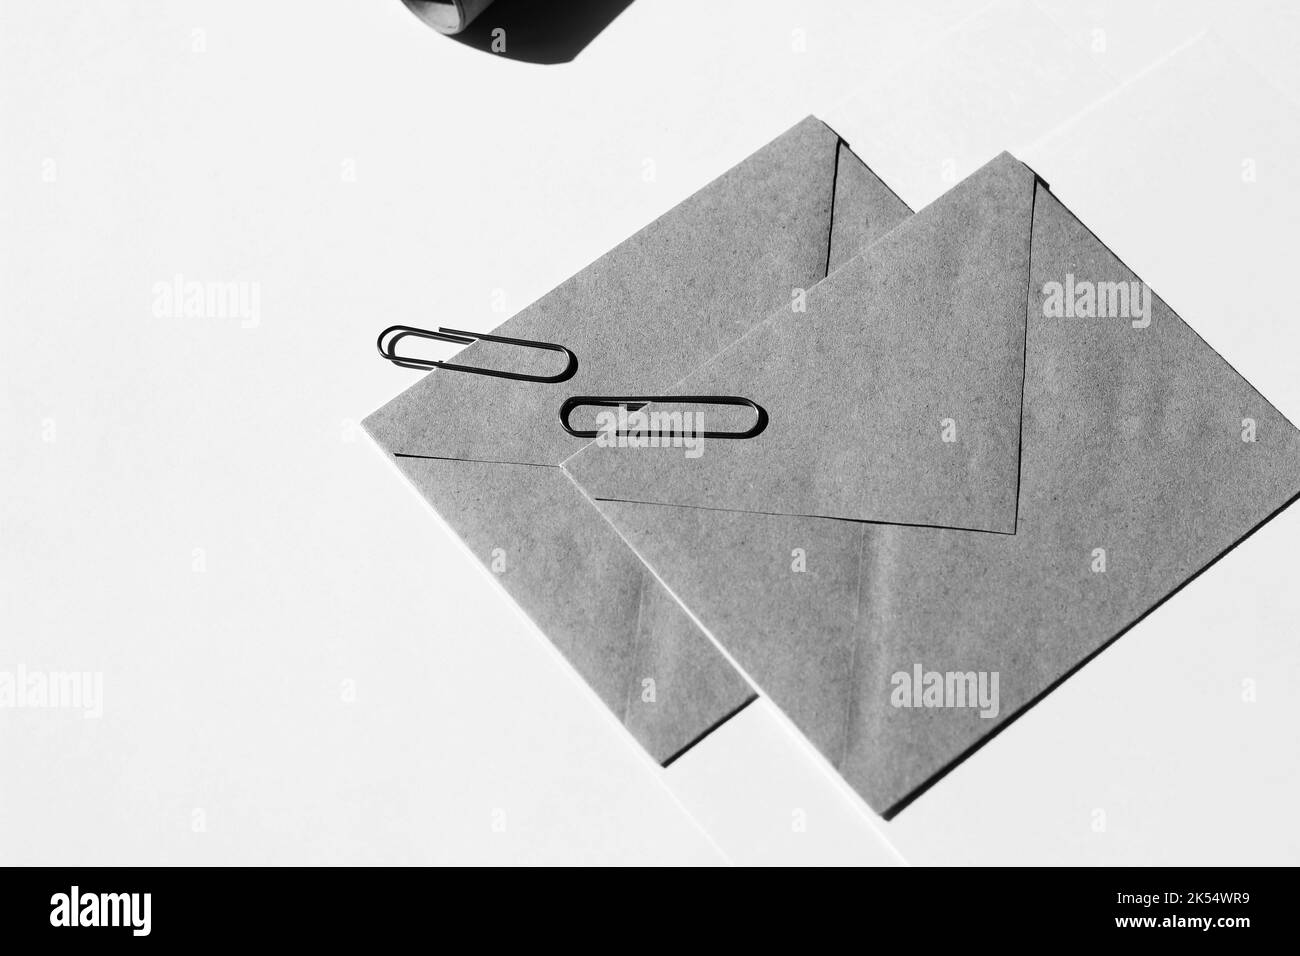 Office Desk with Kraft Paper Envelopes, Paper Clips. Stationery. Minimal Branding Concept. Stock Photo